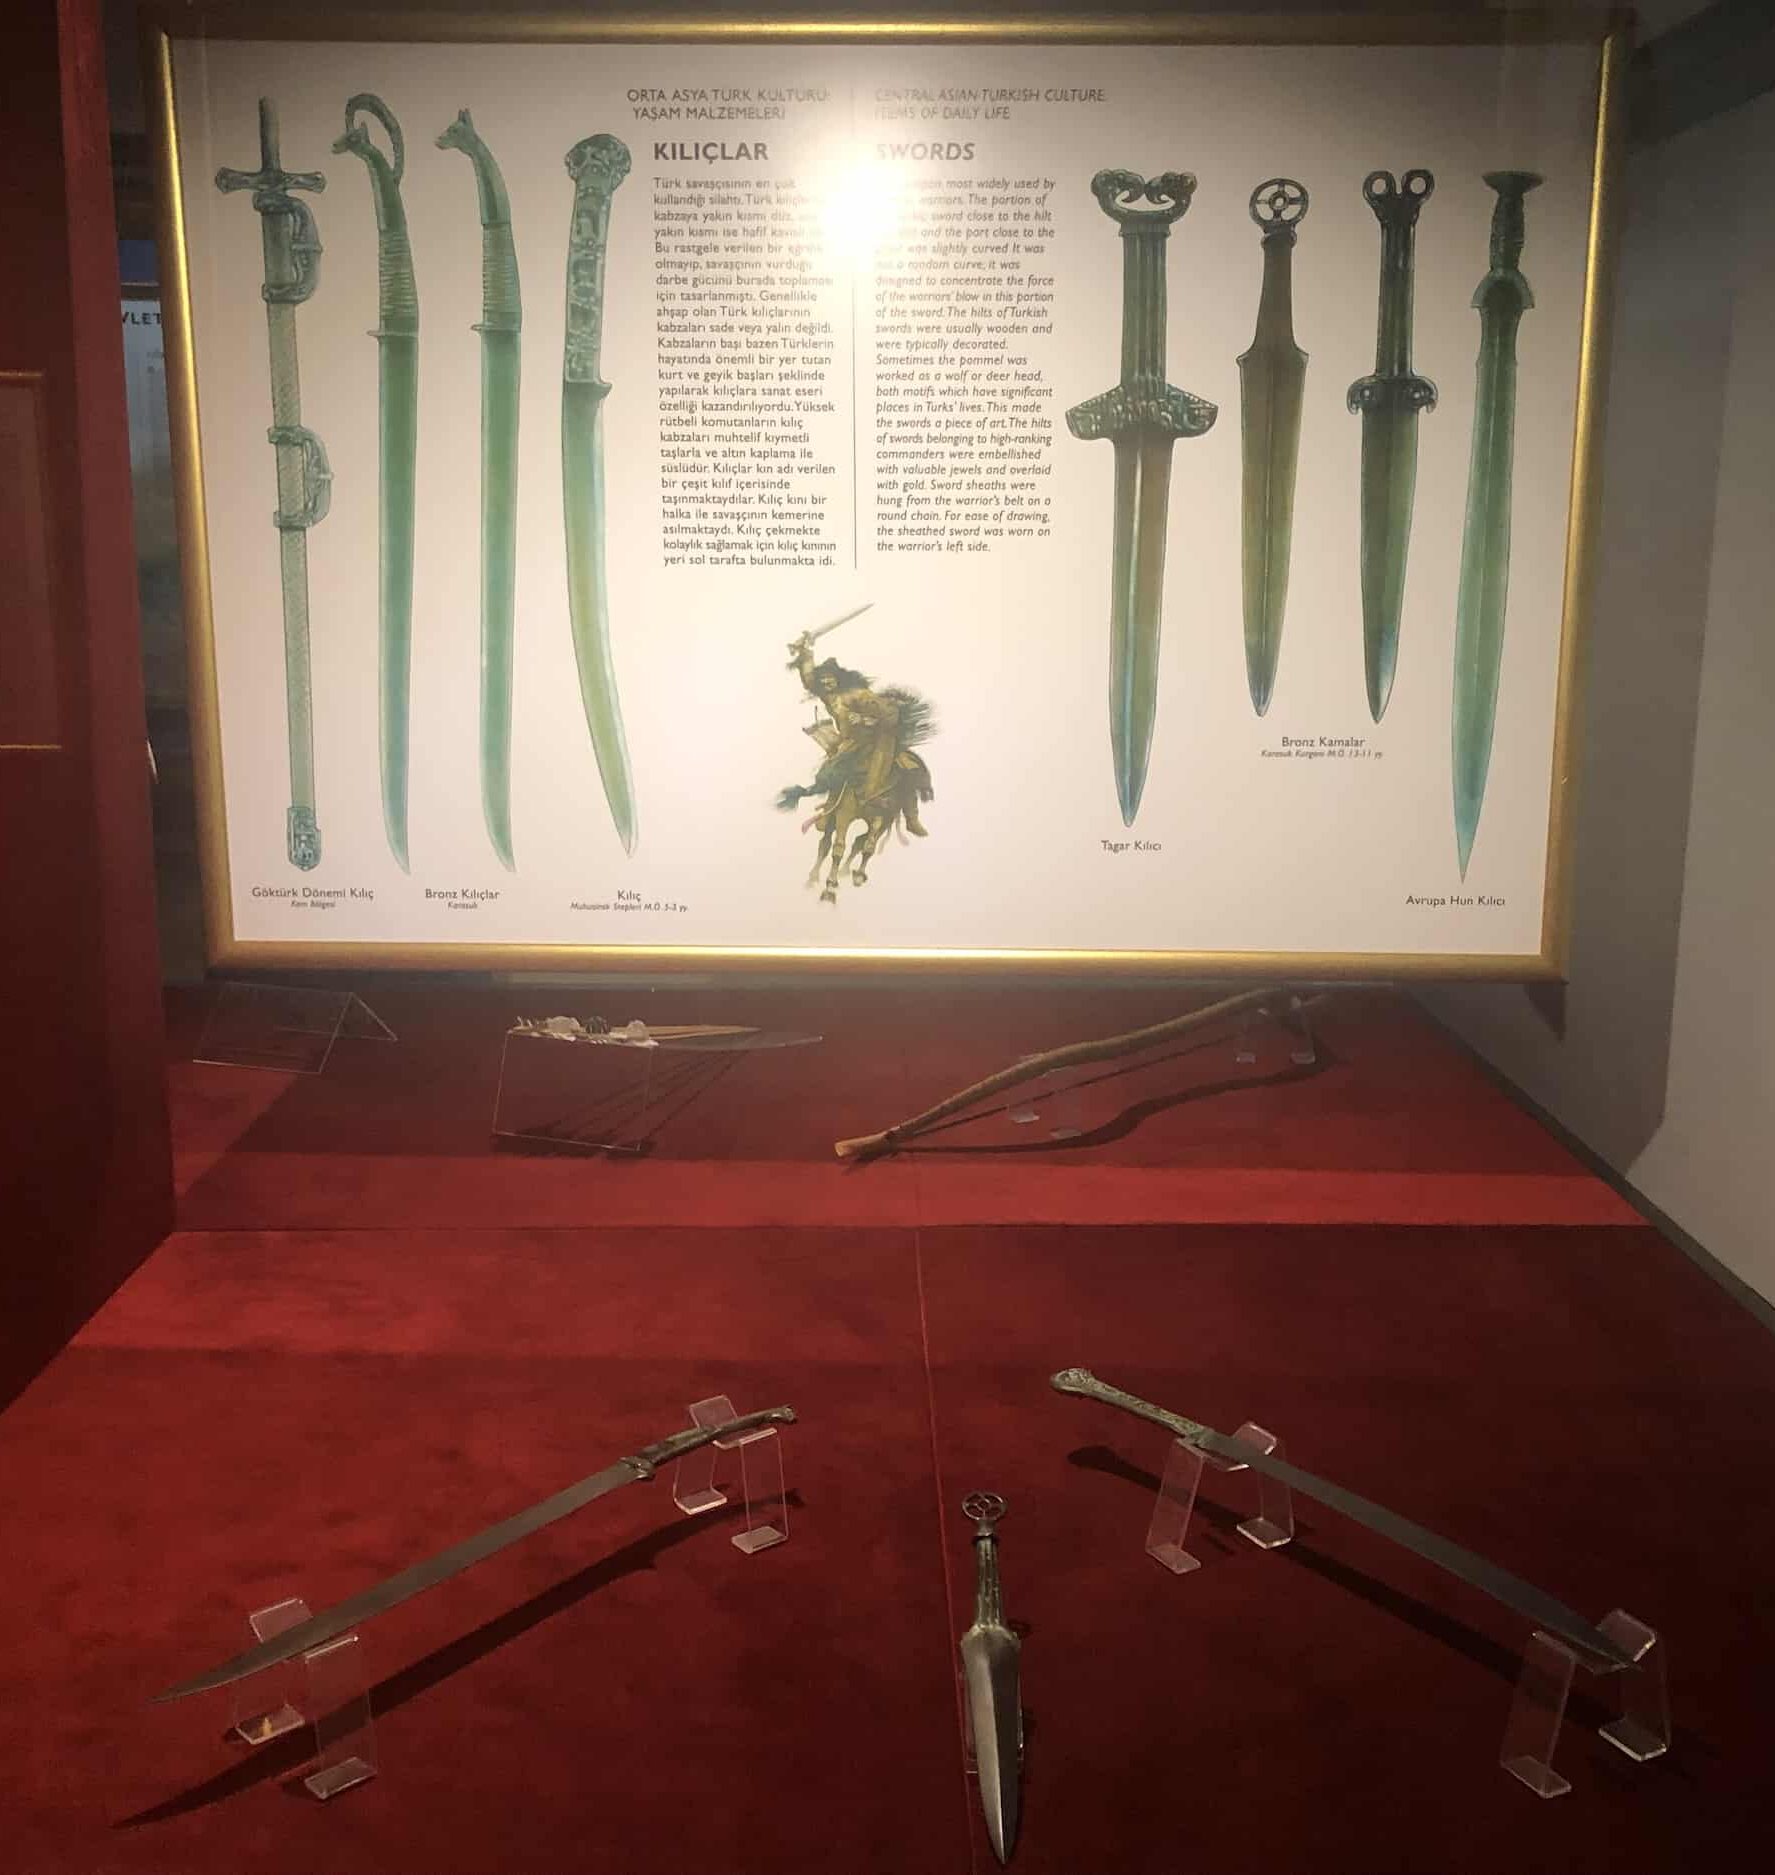 Swords at the Harbiye Military Museum in Istanbul, Turkey